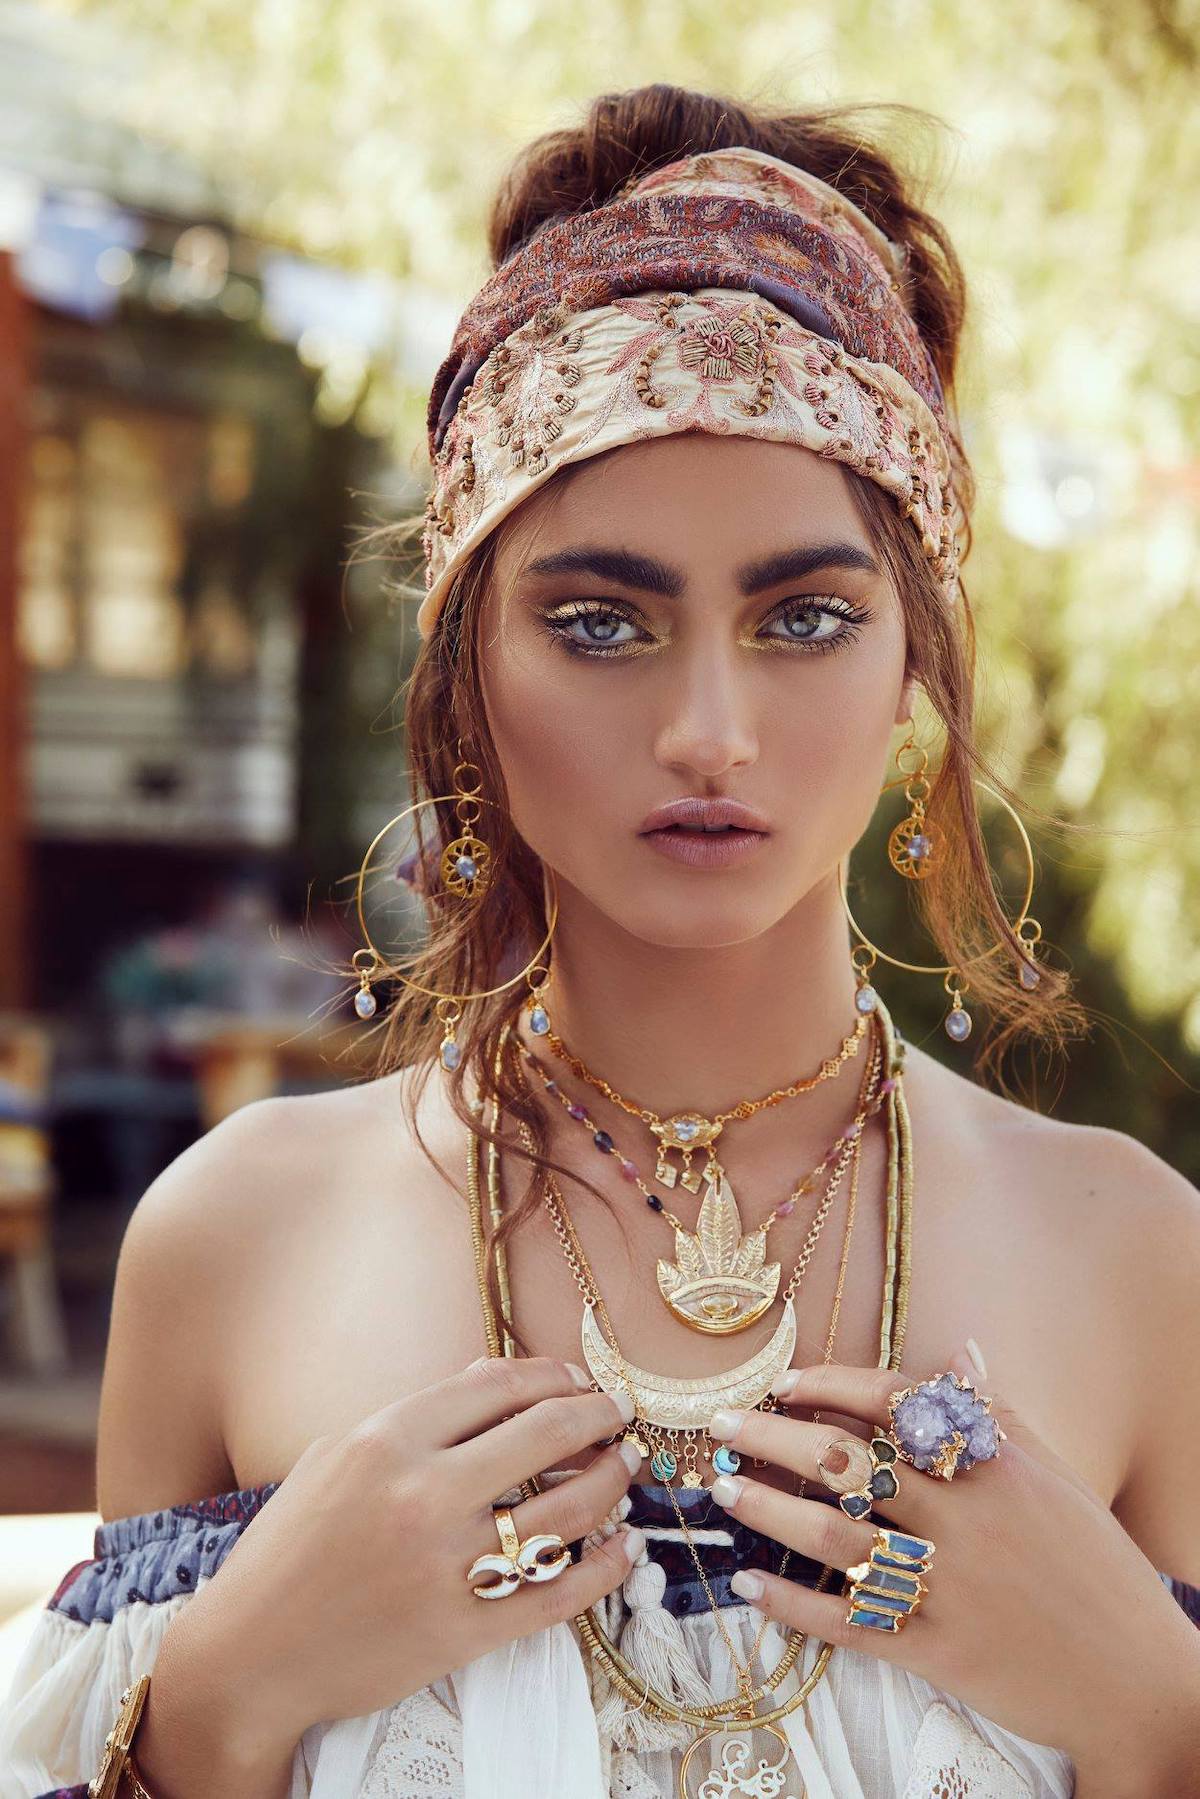 20 Boho Make-up Ideas That Are Worth Trying for All